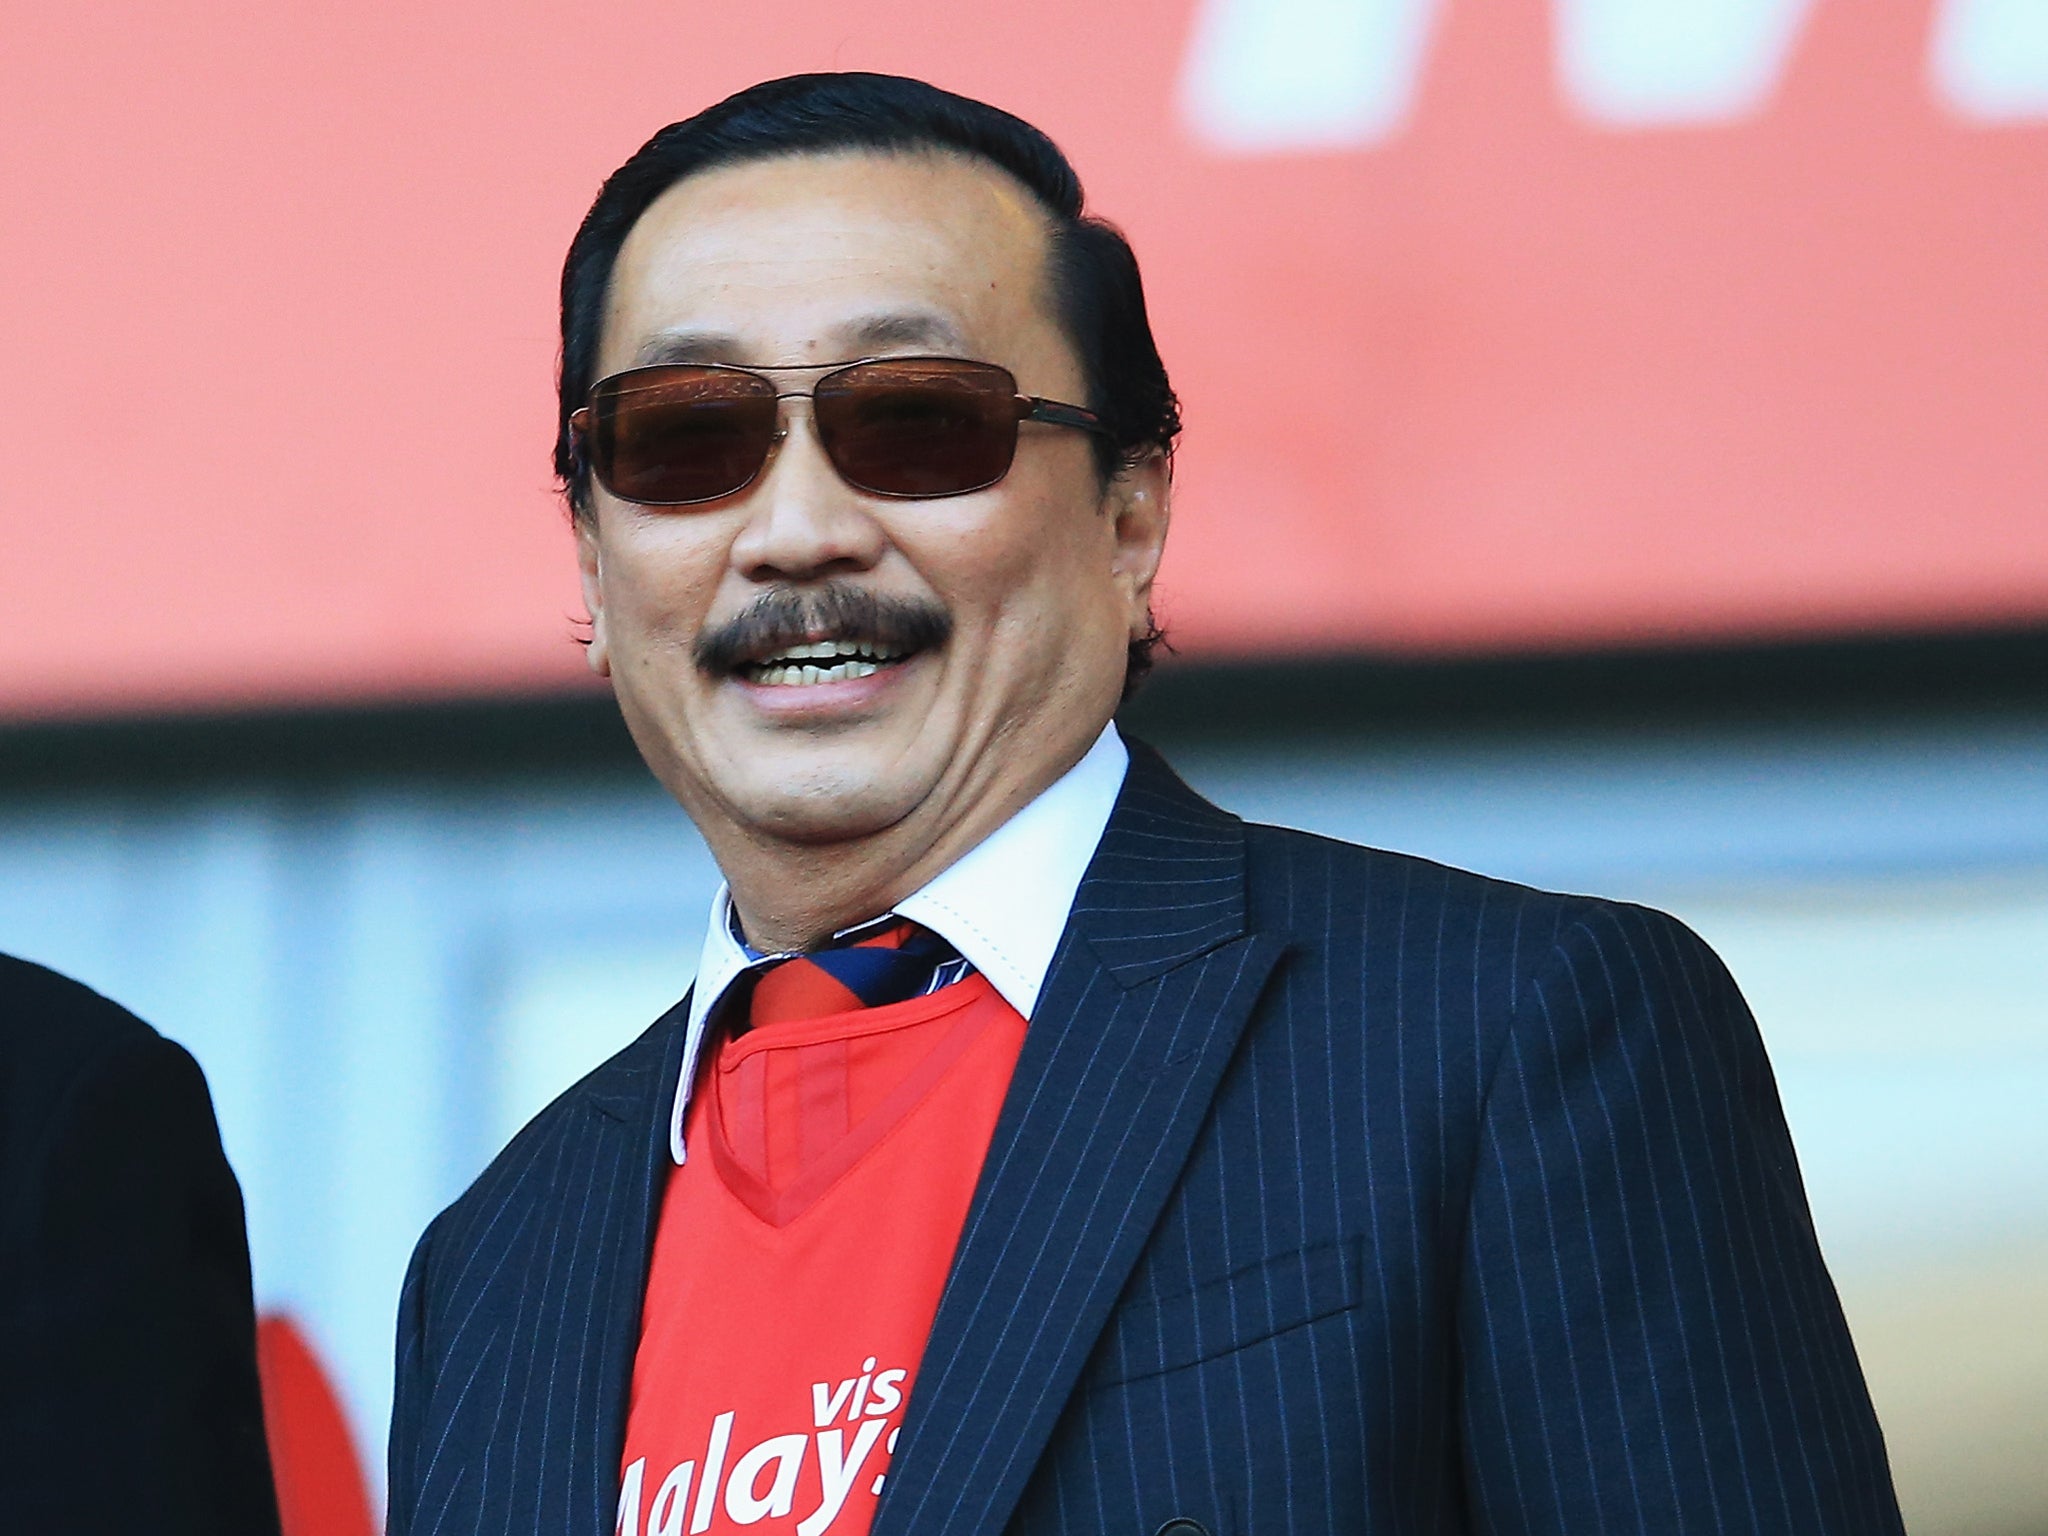 Cardiff City owner Vincent Tan has defended his match-day outfit